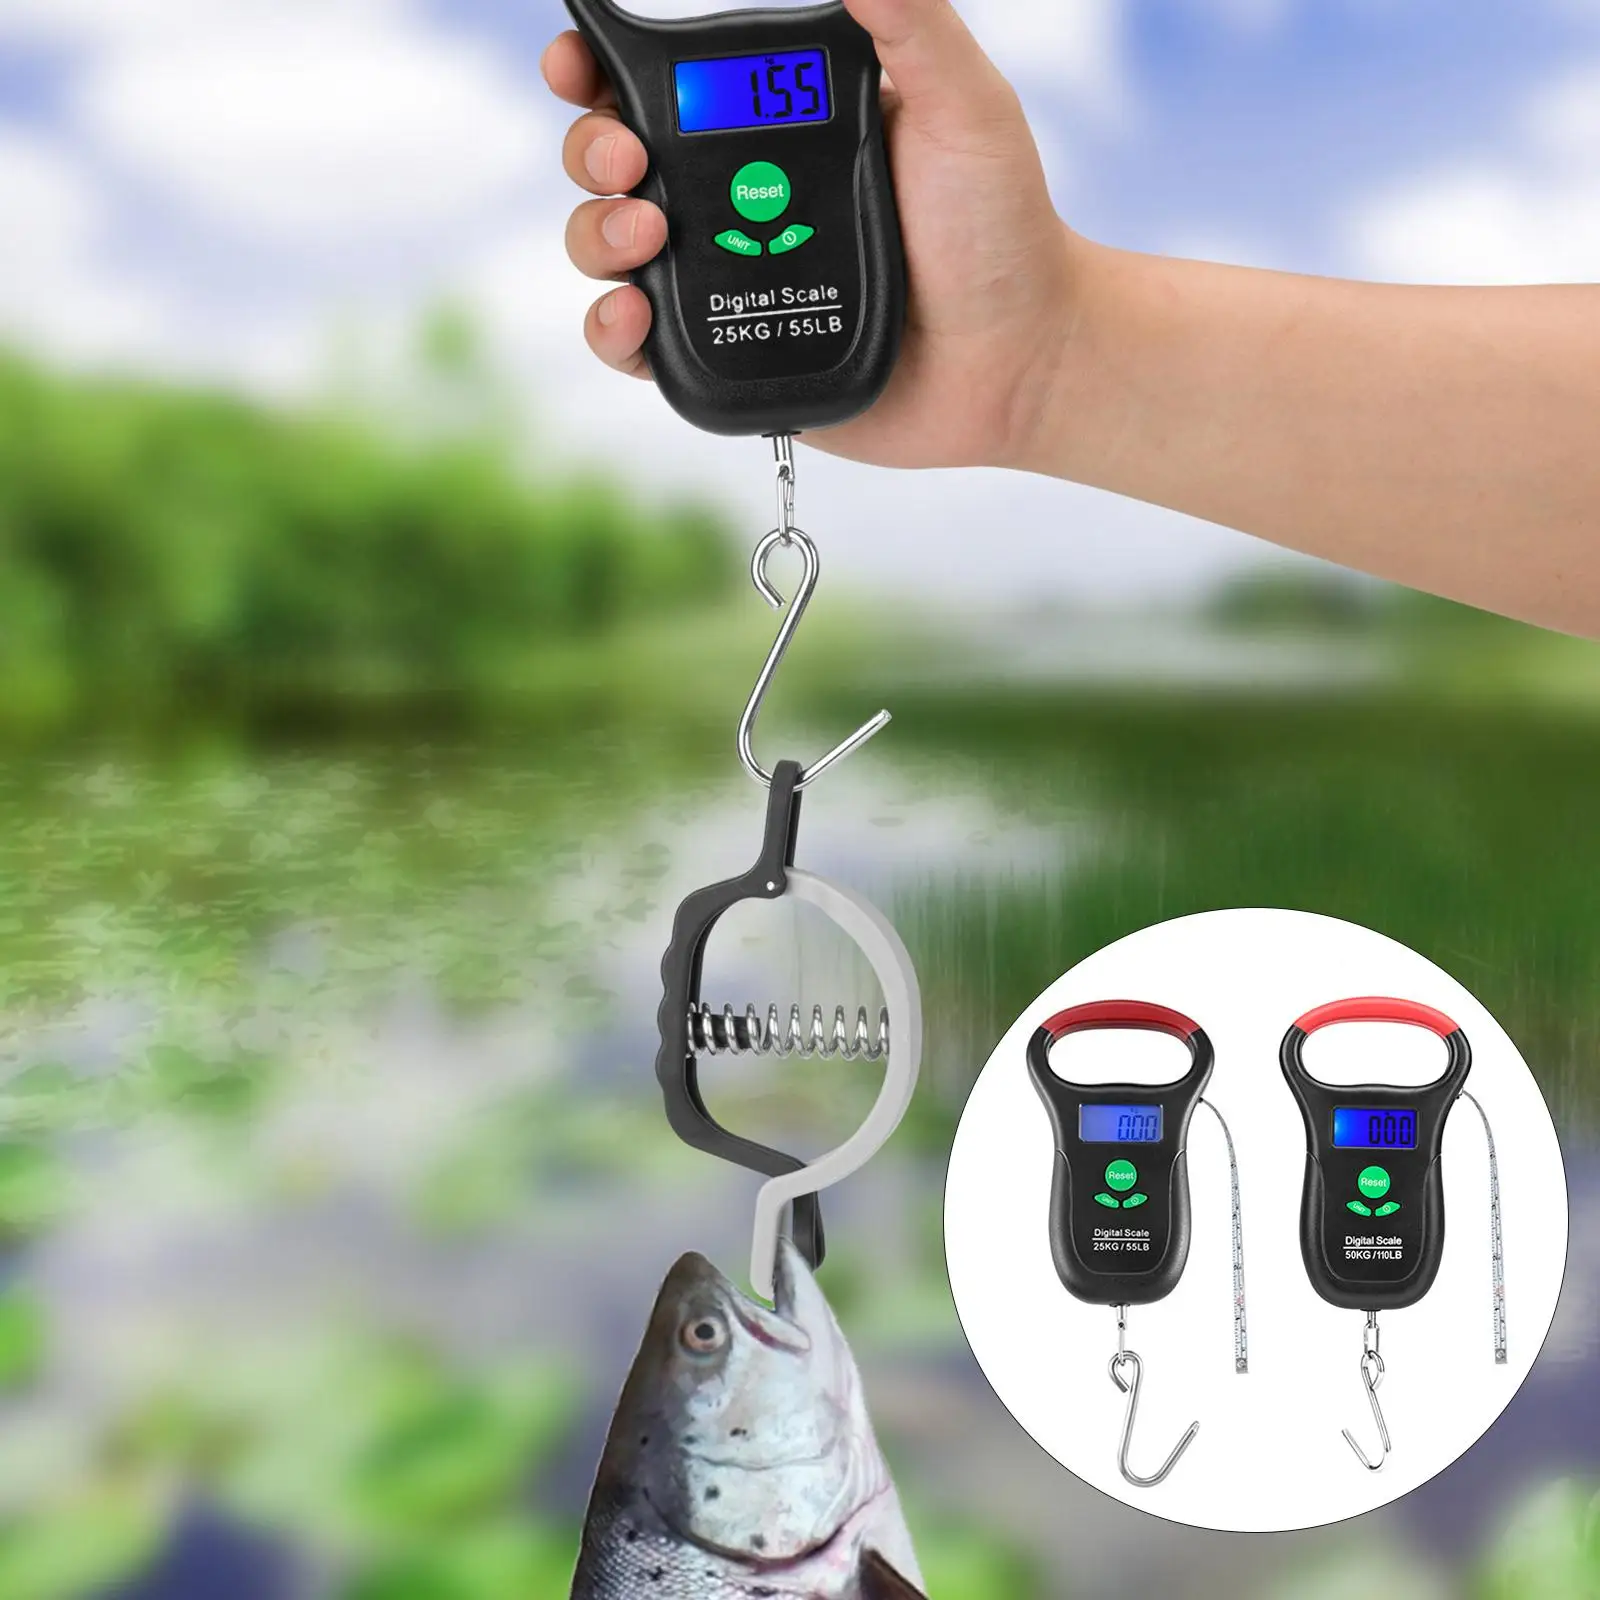 LCD Fishing Digital Scale Electronic Bag Luggage Weight with Tape Measure